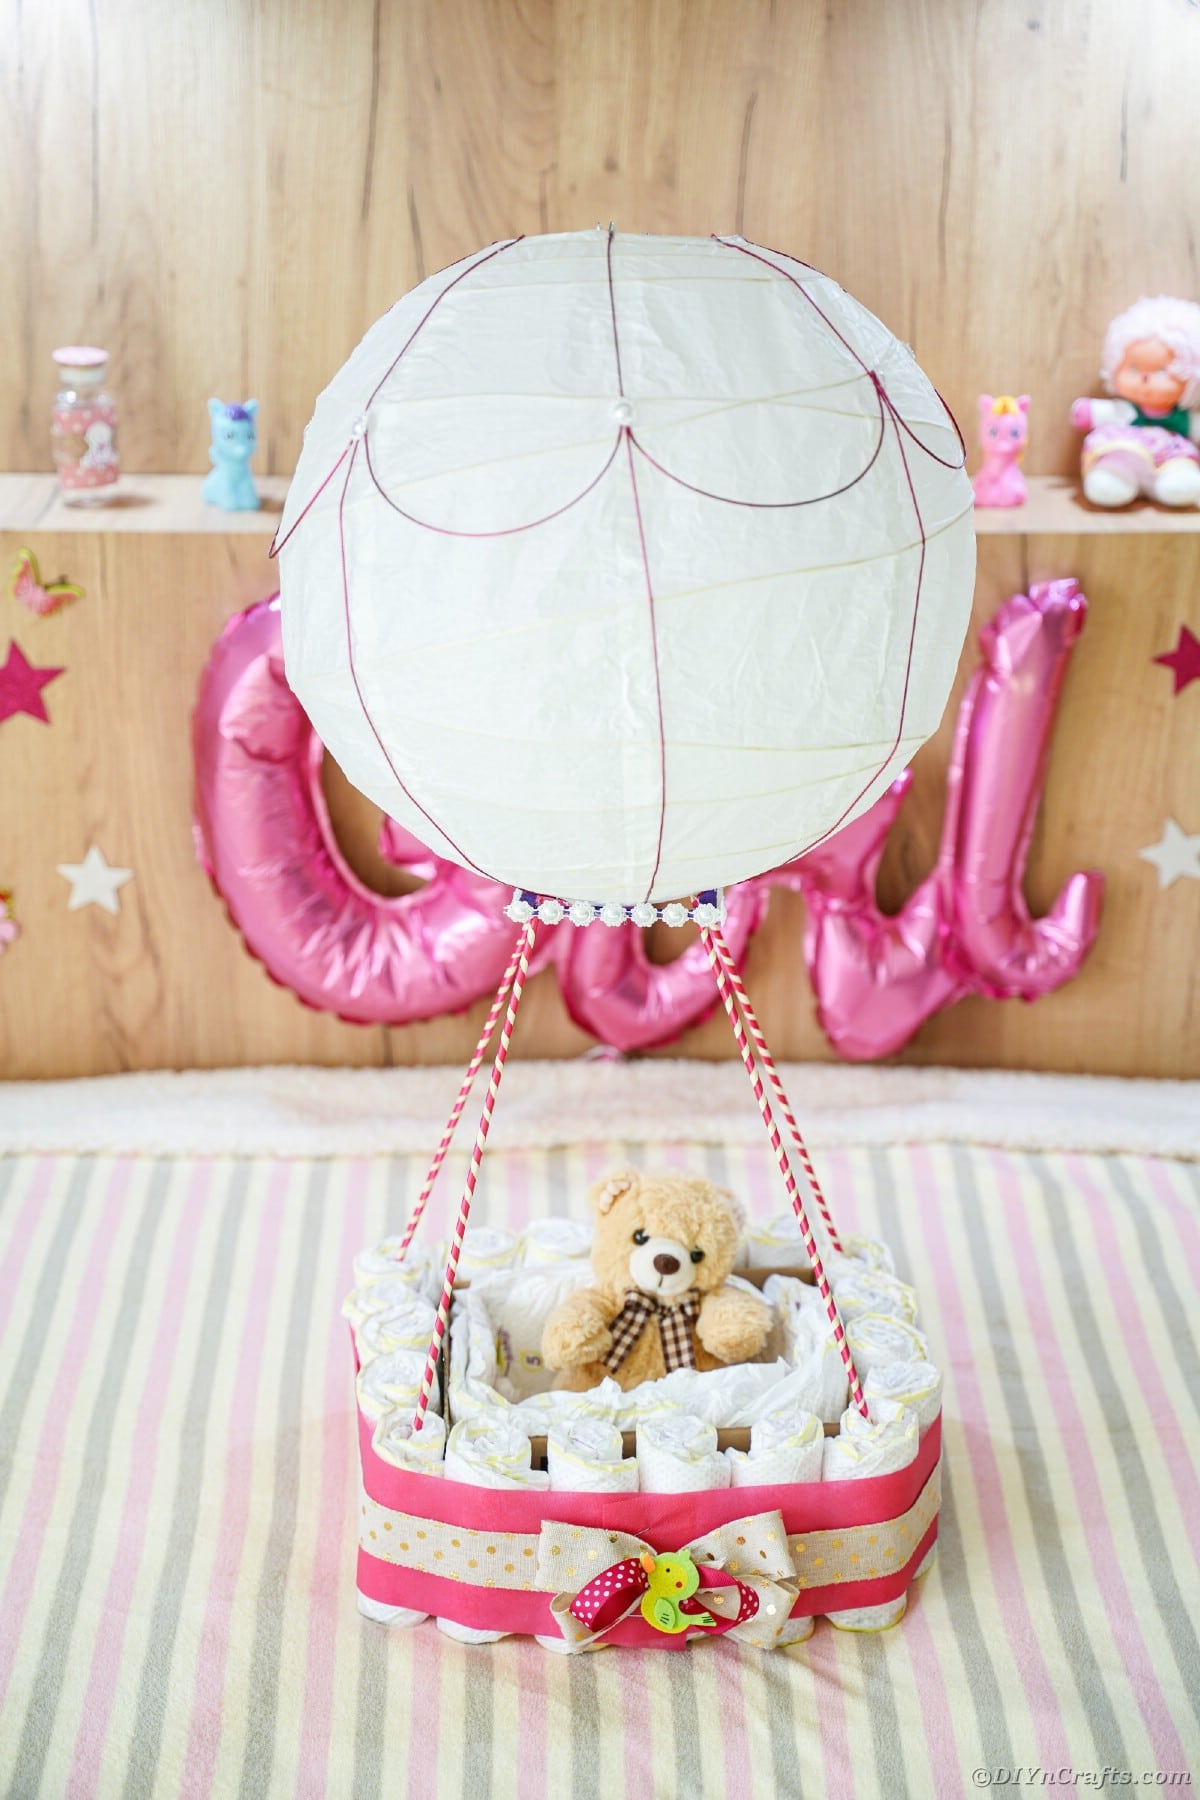 Diaper cake air balloon on bed